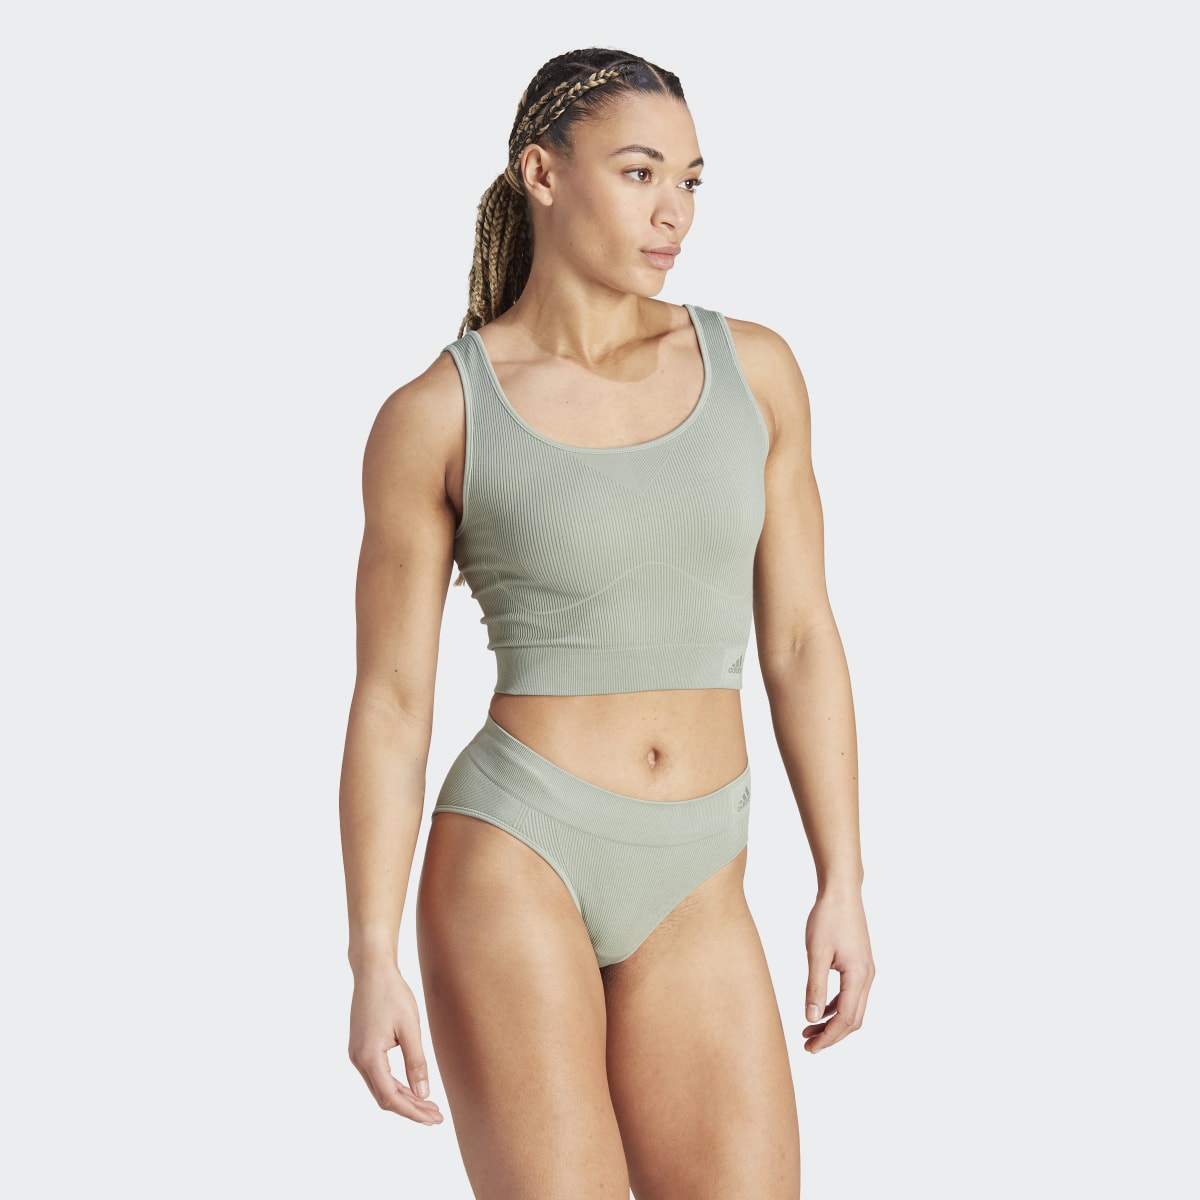 Adidas Ribbed Active Seamless Cropped Tank Top Underwear. 4